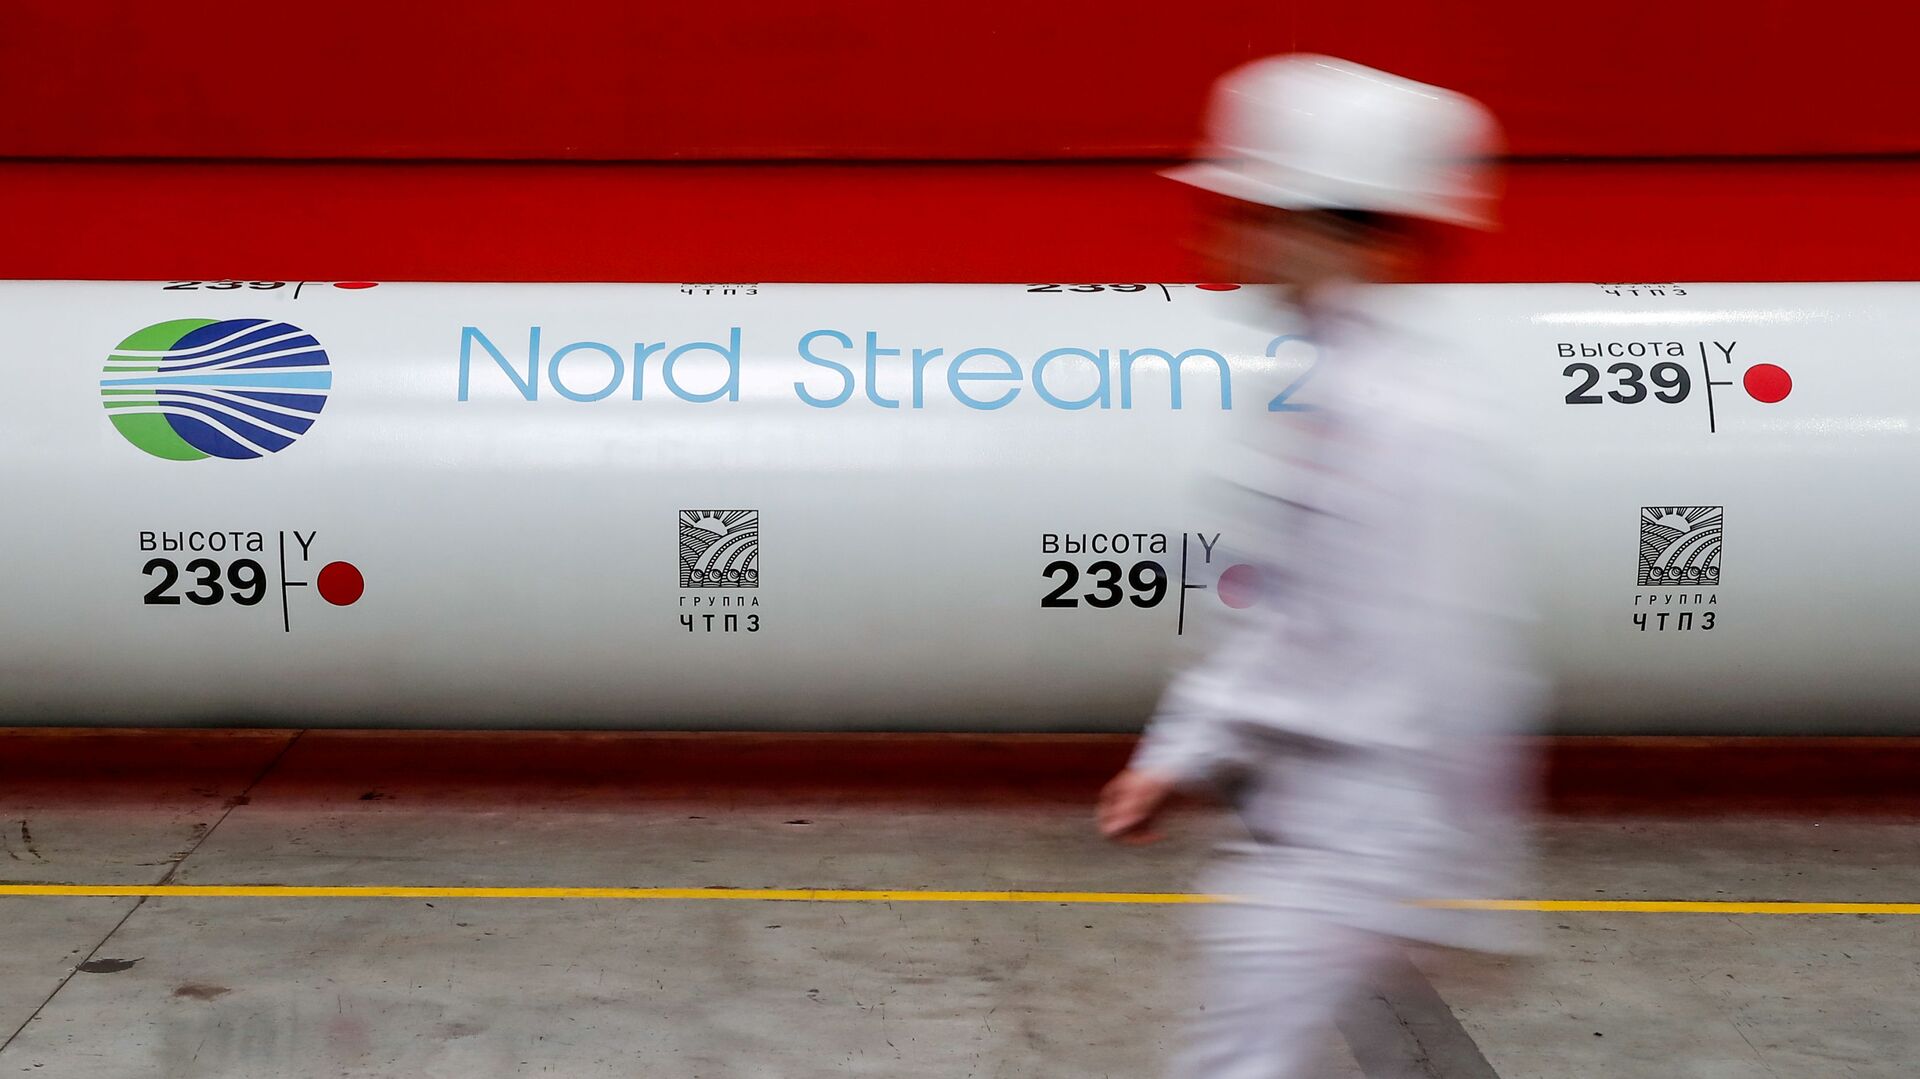 The logo of the Nord Stream 2 gas pipeline project is seen on a pipe at the Chelyabinsk pipe rolling plant in Chelyabinsk, Russia, 26 February 2020. - Sputnik International, 1920, 25.02.2021